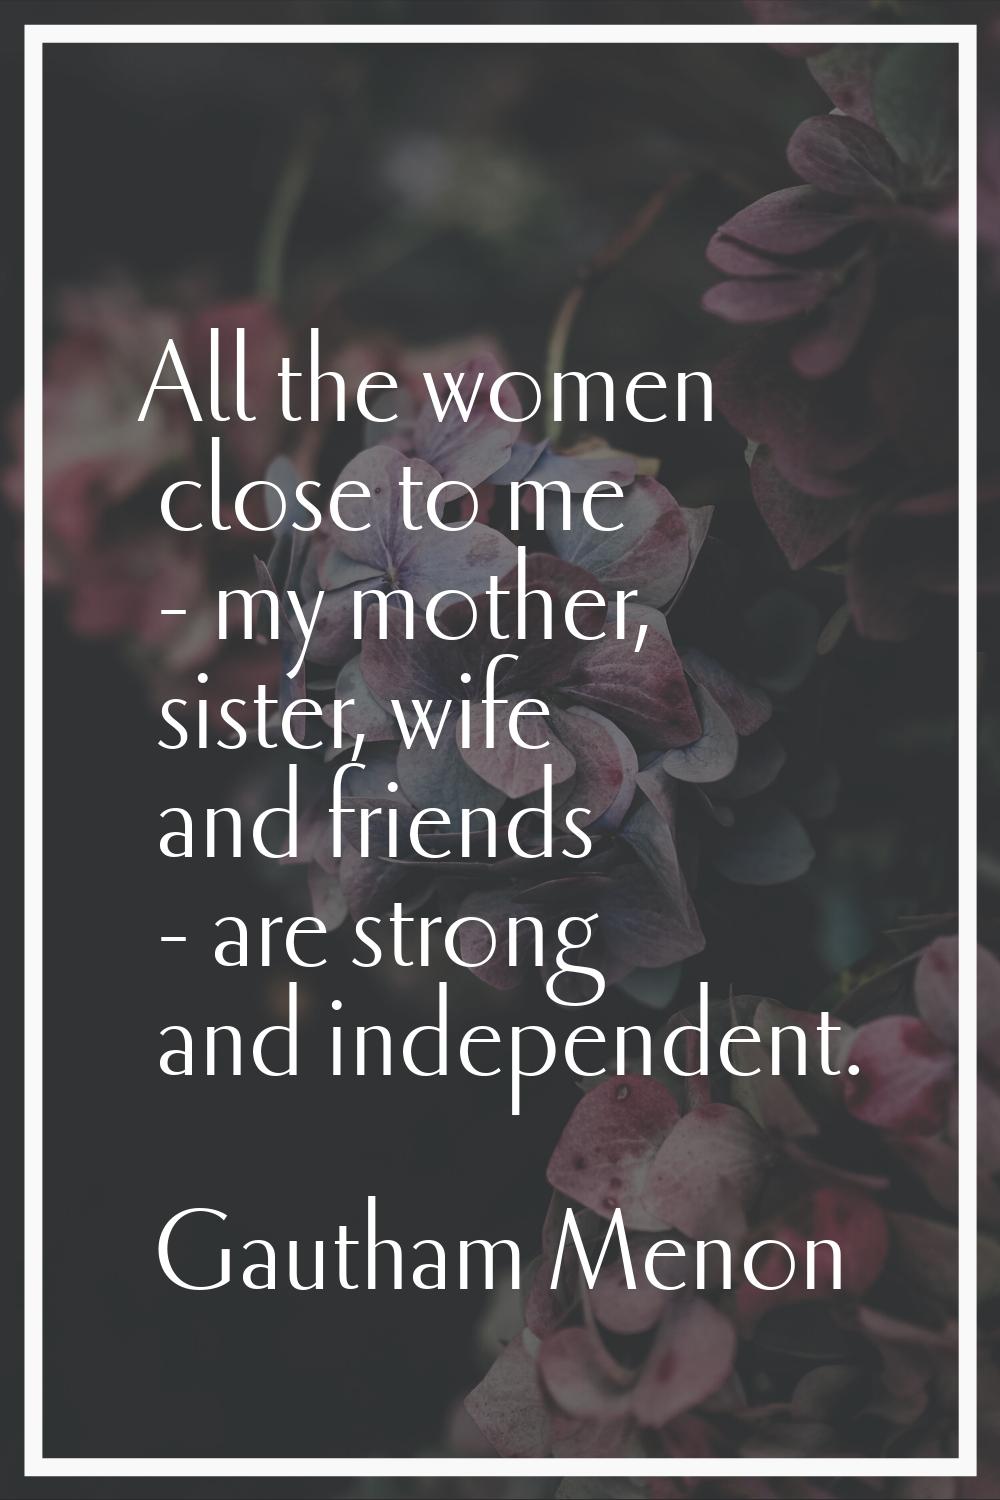 All the women close to me - my mother, sister, wife and friends - are strong and independent.